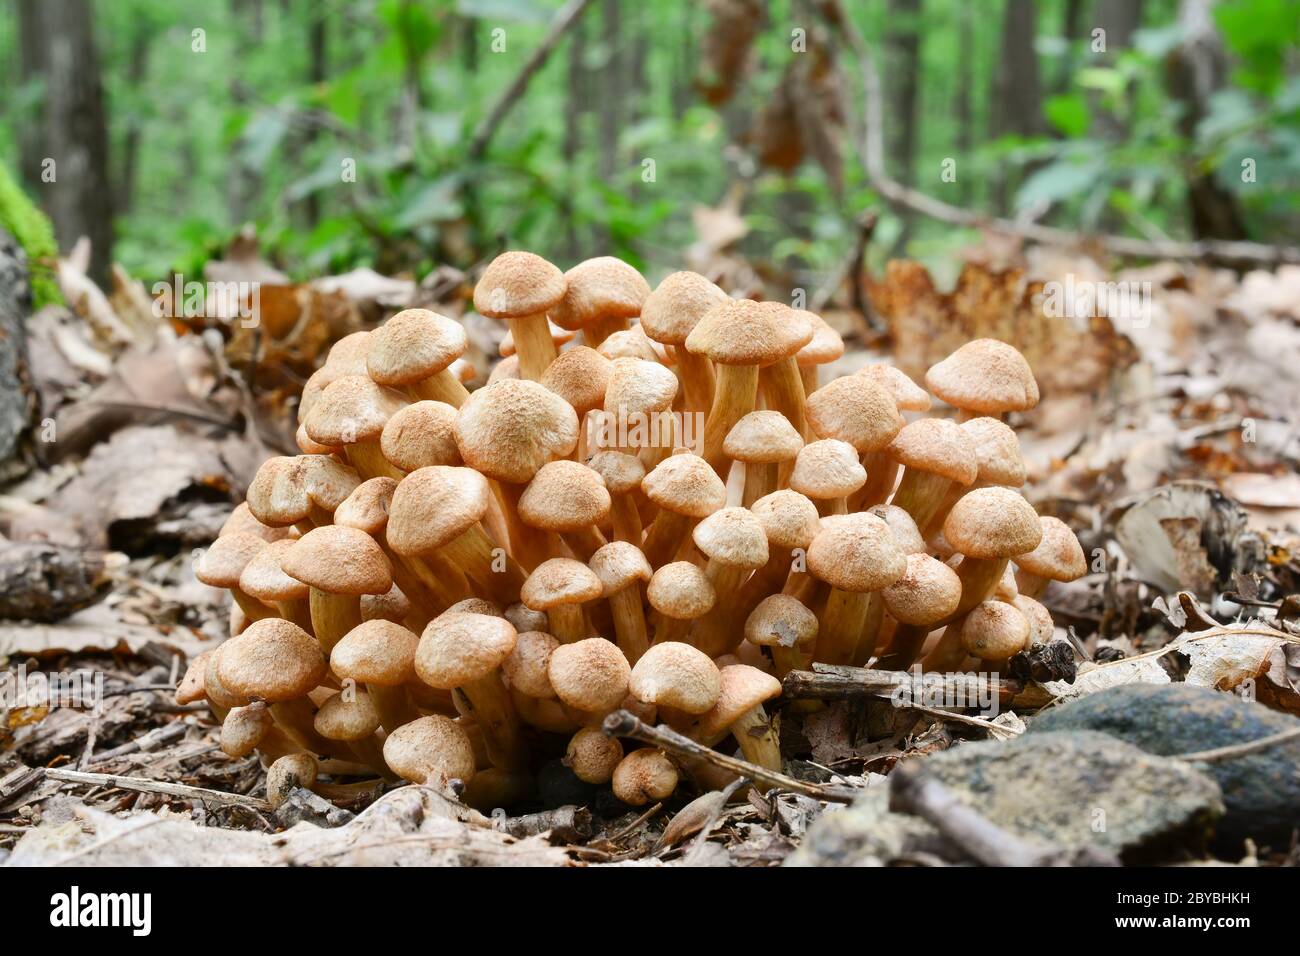 Cluster of very young specimen of Armillaria tabescens or Ringless Honey Fungus in oak forest, close up view, horizontal orientation Stock Photo